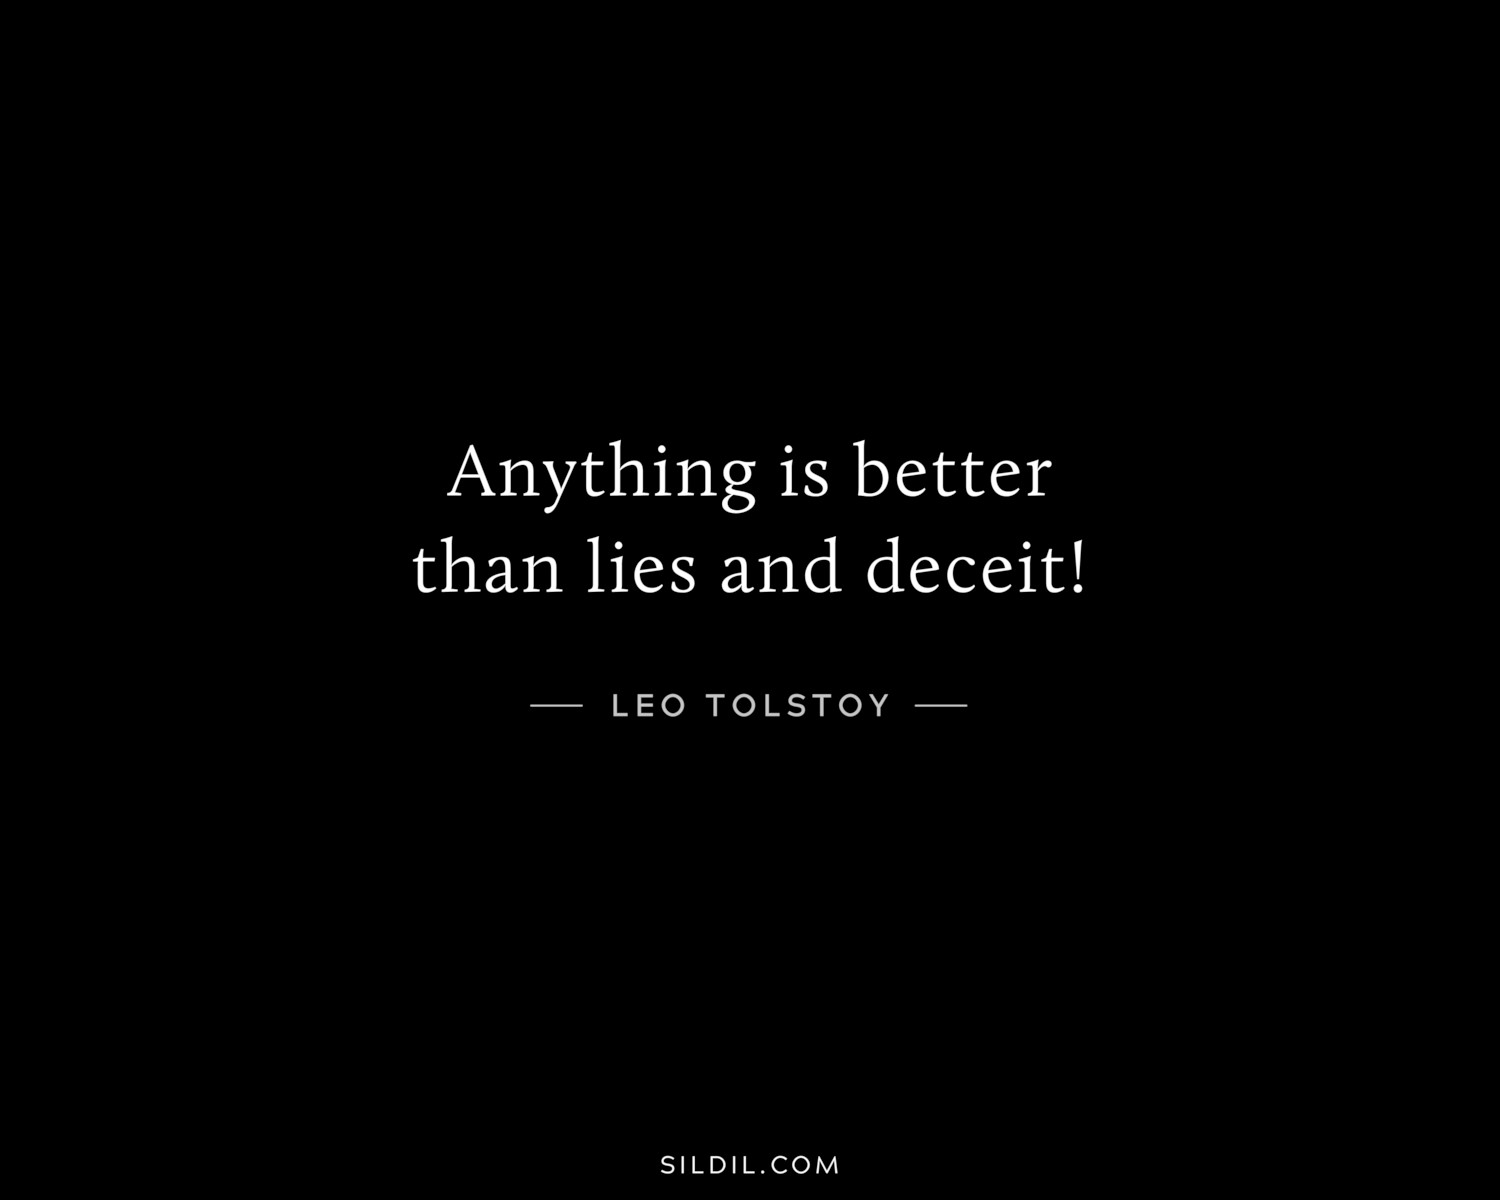 Anything is better than lies and deceit!